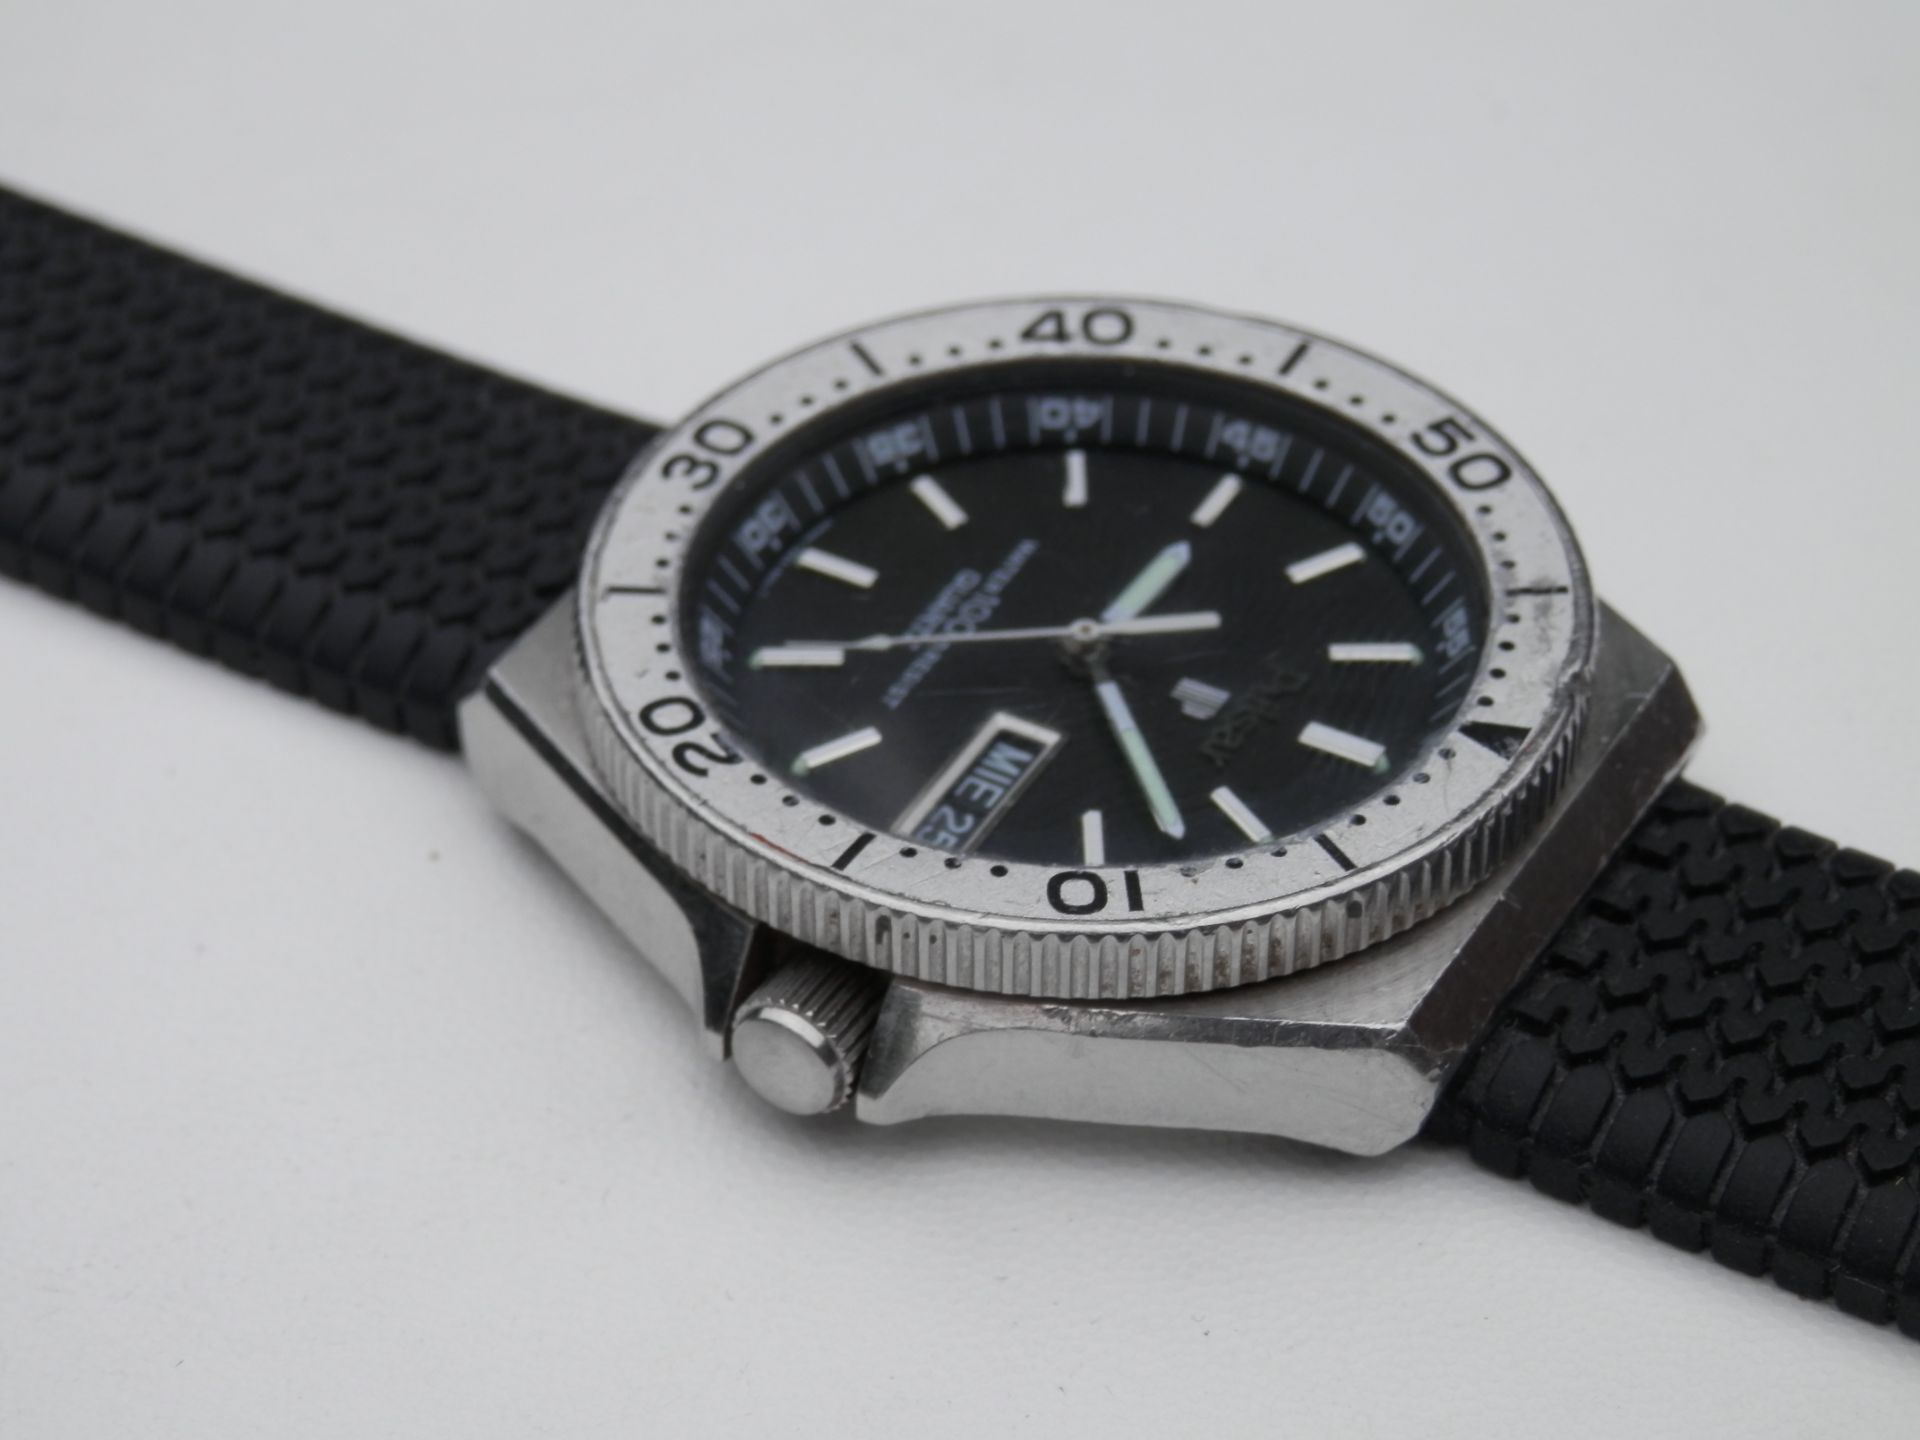 RARE GENTS 1980S PULSAR Y563 DIVERS STYLE 100M WATER RESISTANT QUARTZ DAY/DATE WATCH, WORKING. - Image 6 of 7